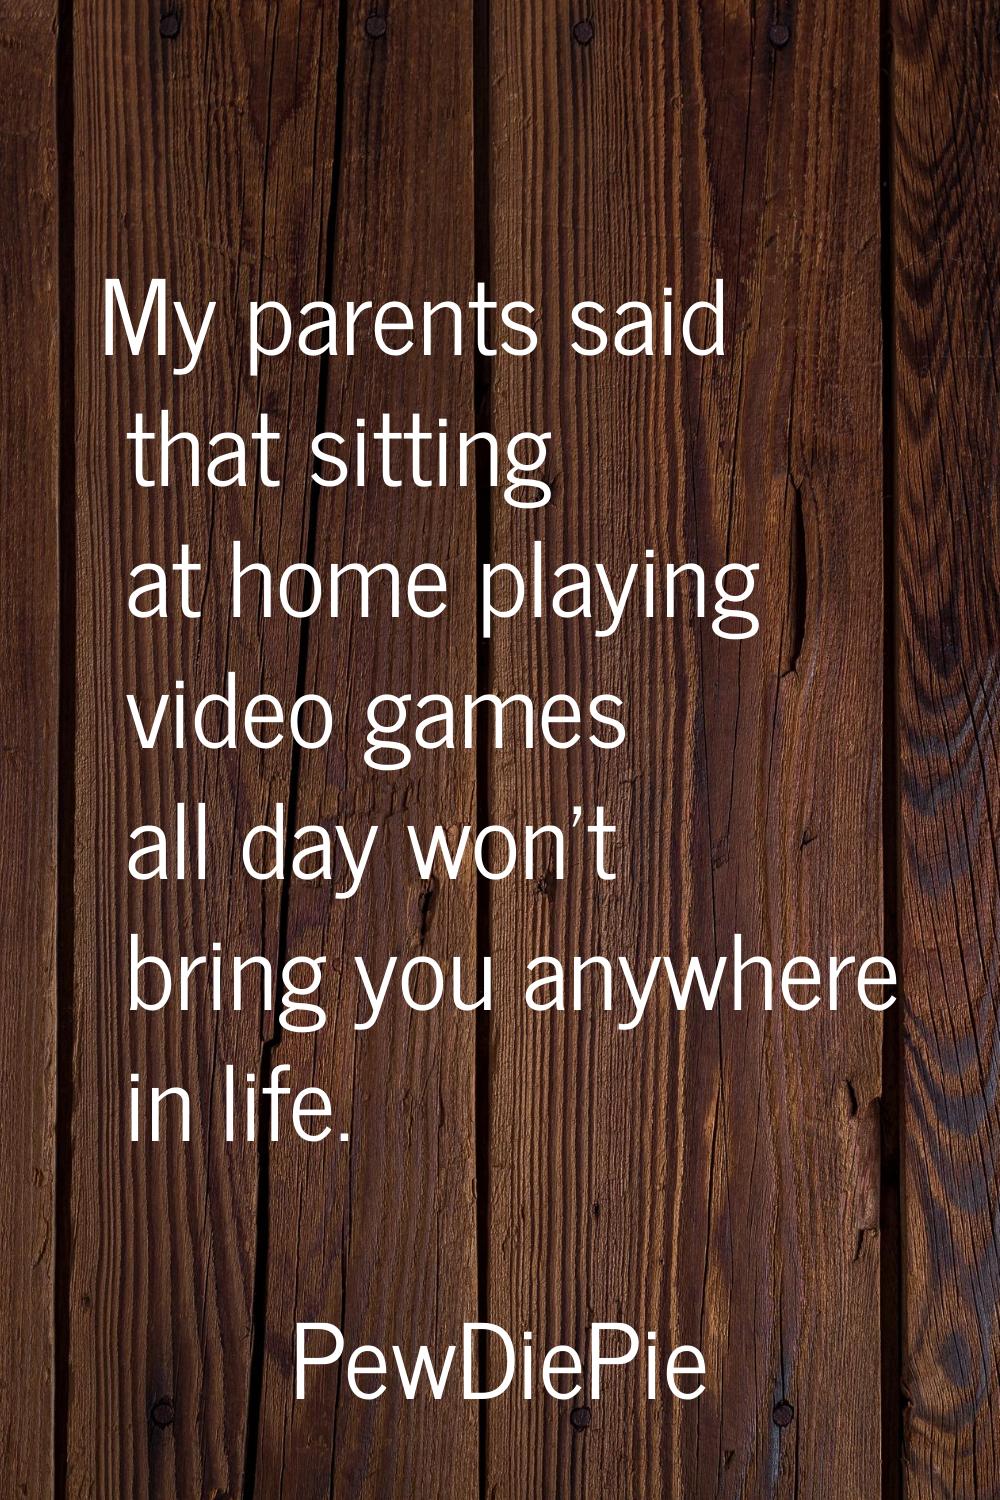 My parents said that sitting at home playing video games all day won't bring you anywhere in life.